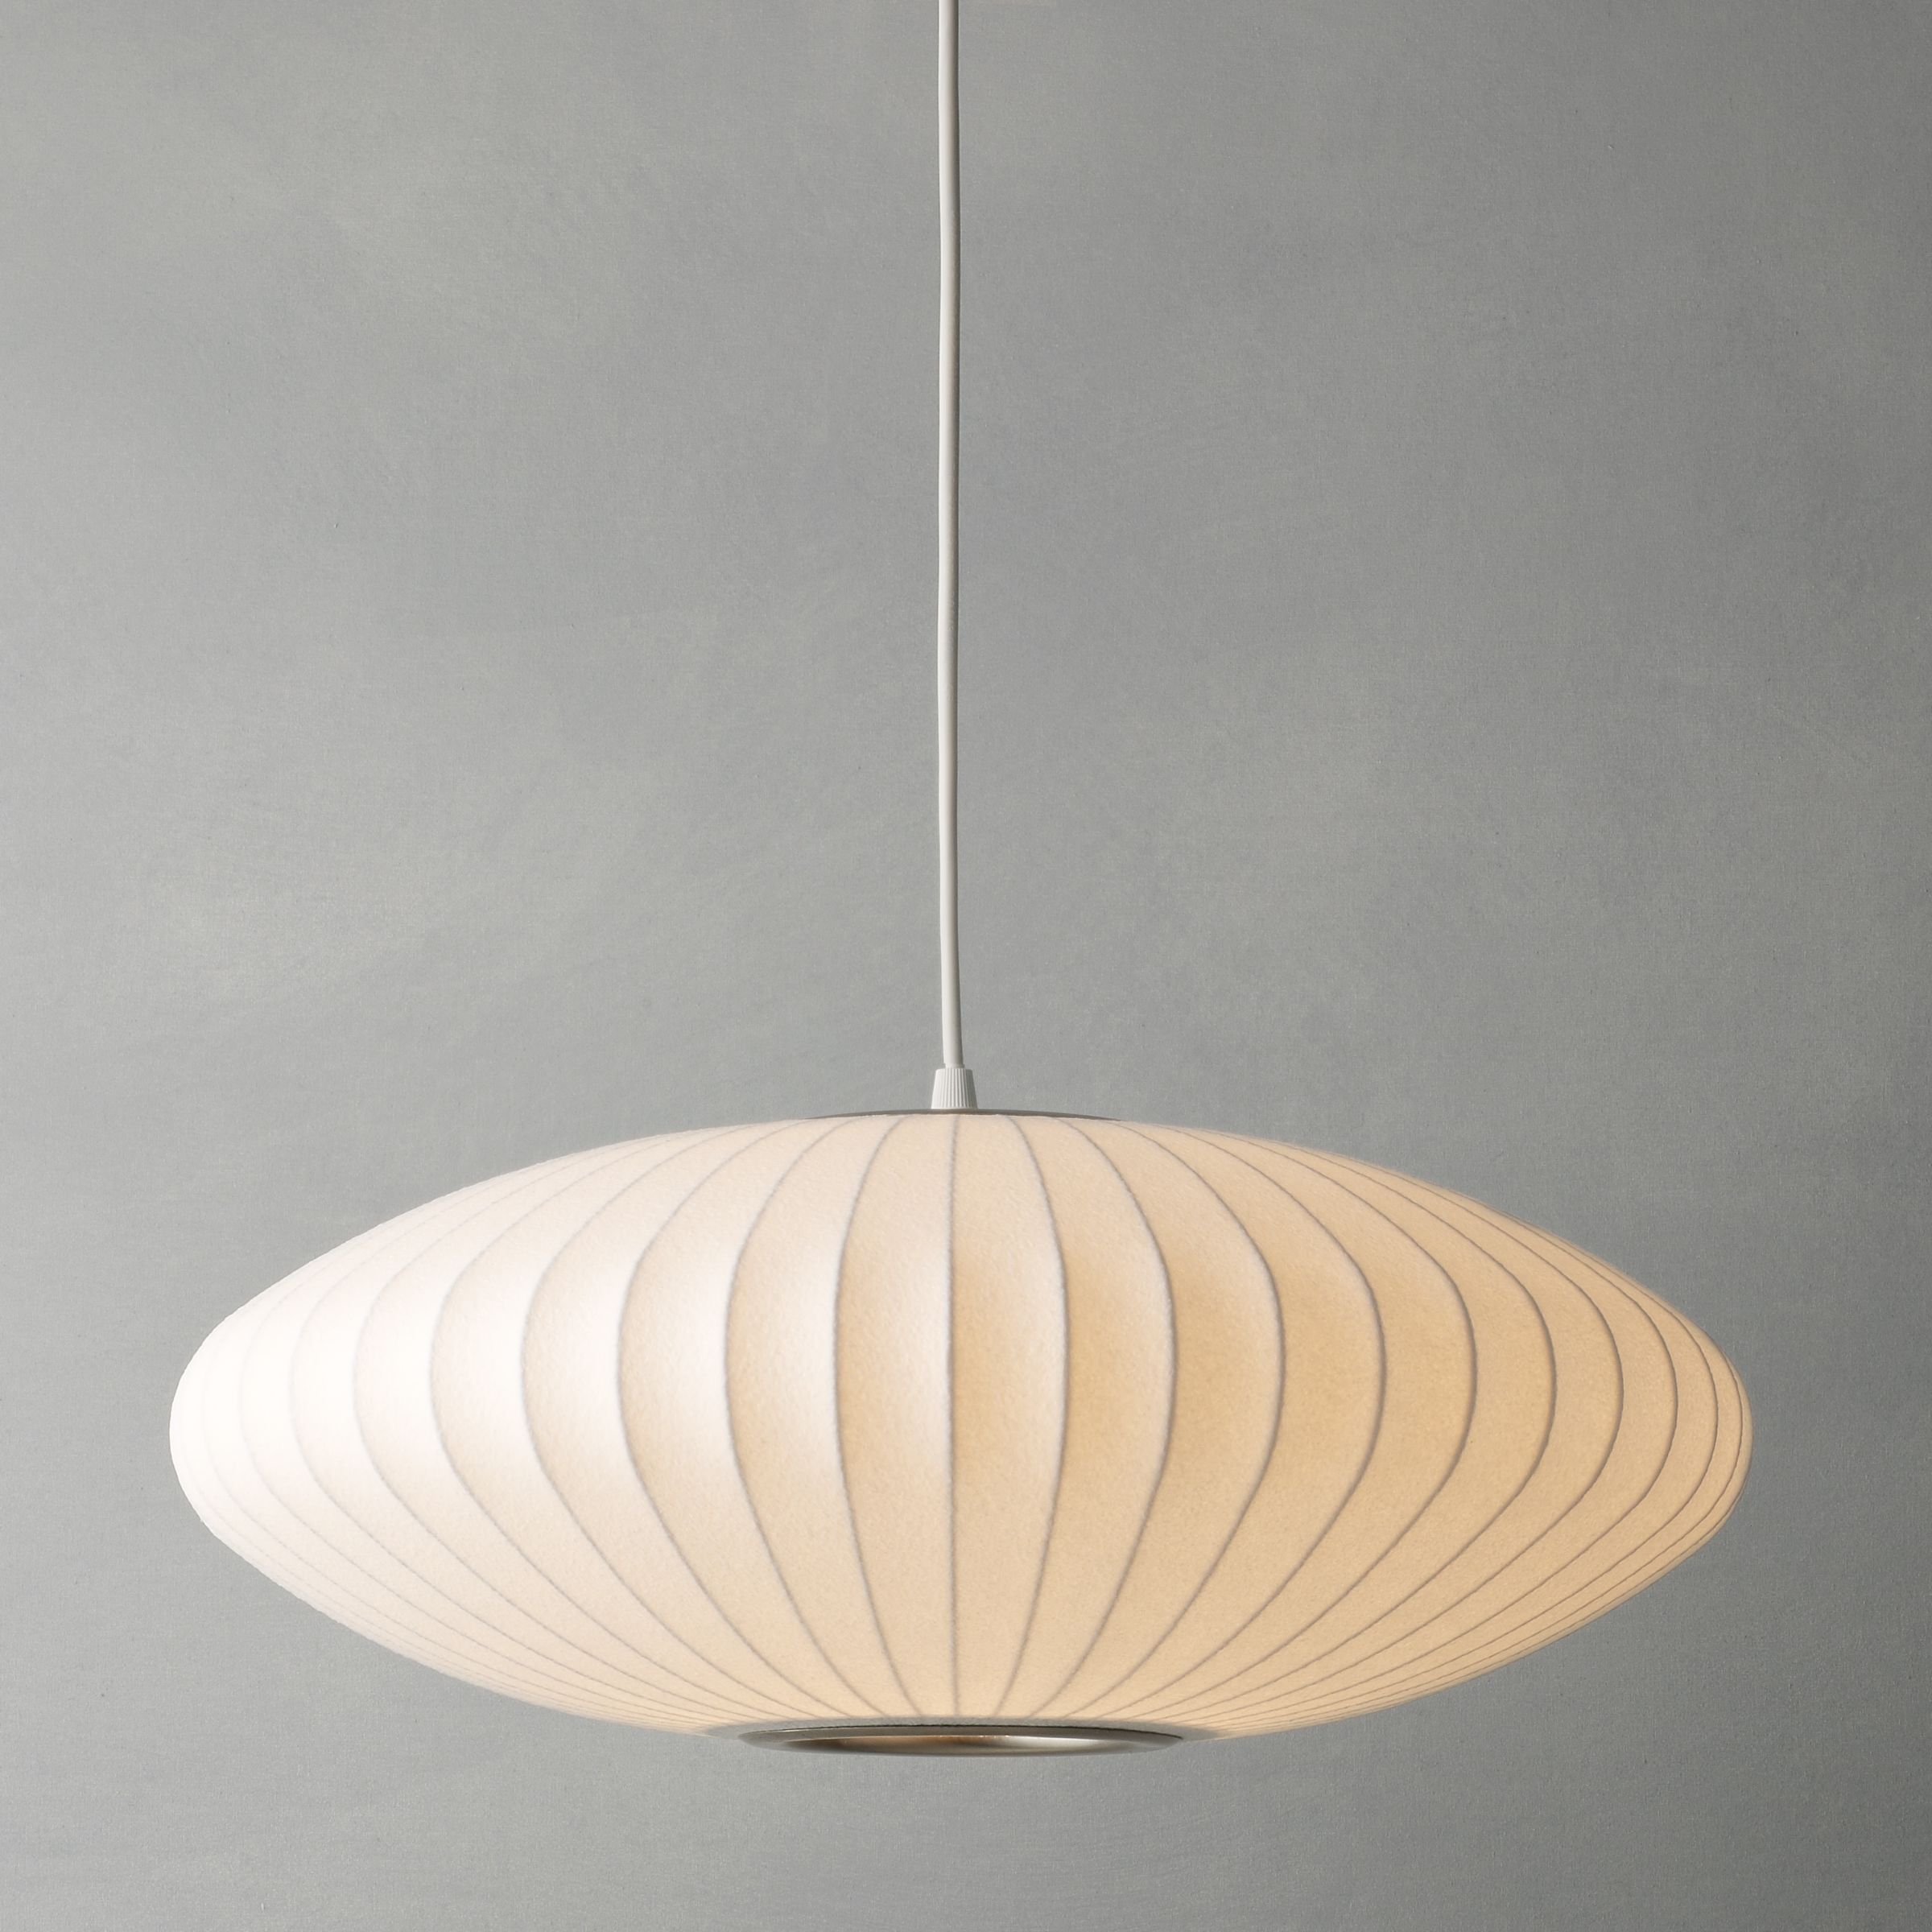 Bubble Saucer Ceiling Light, Small